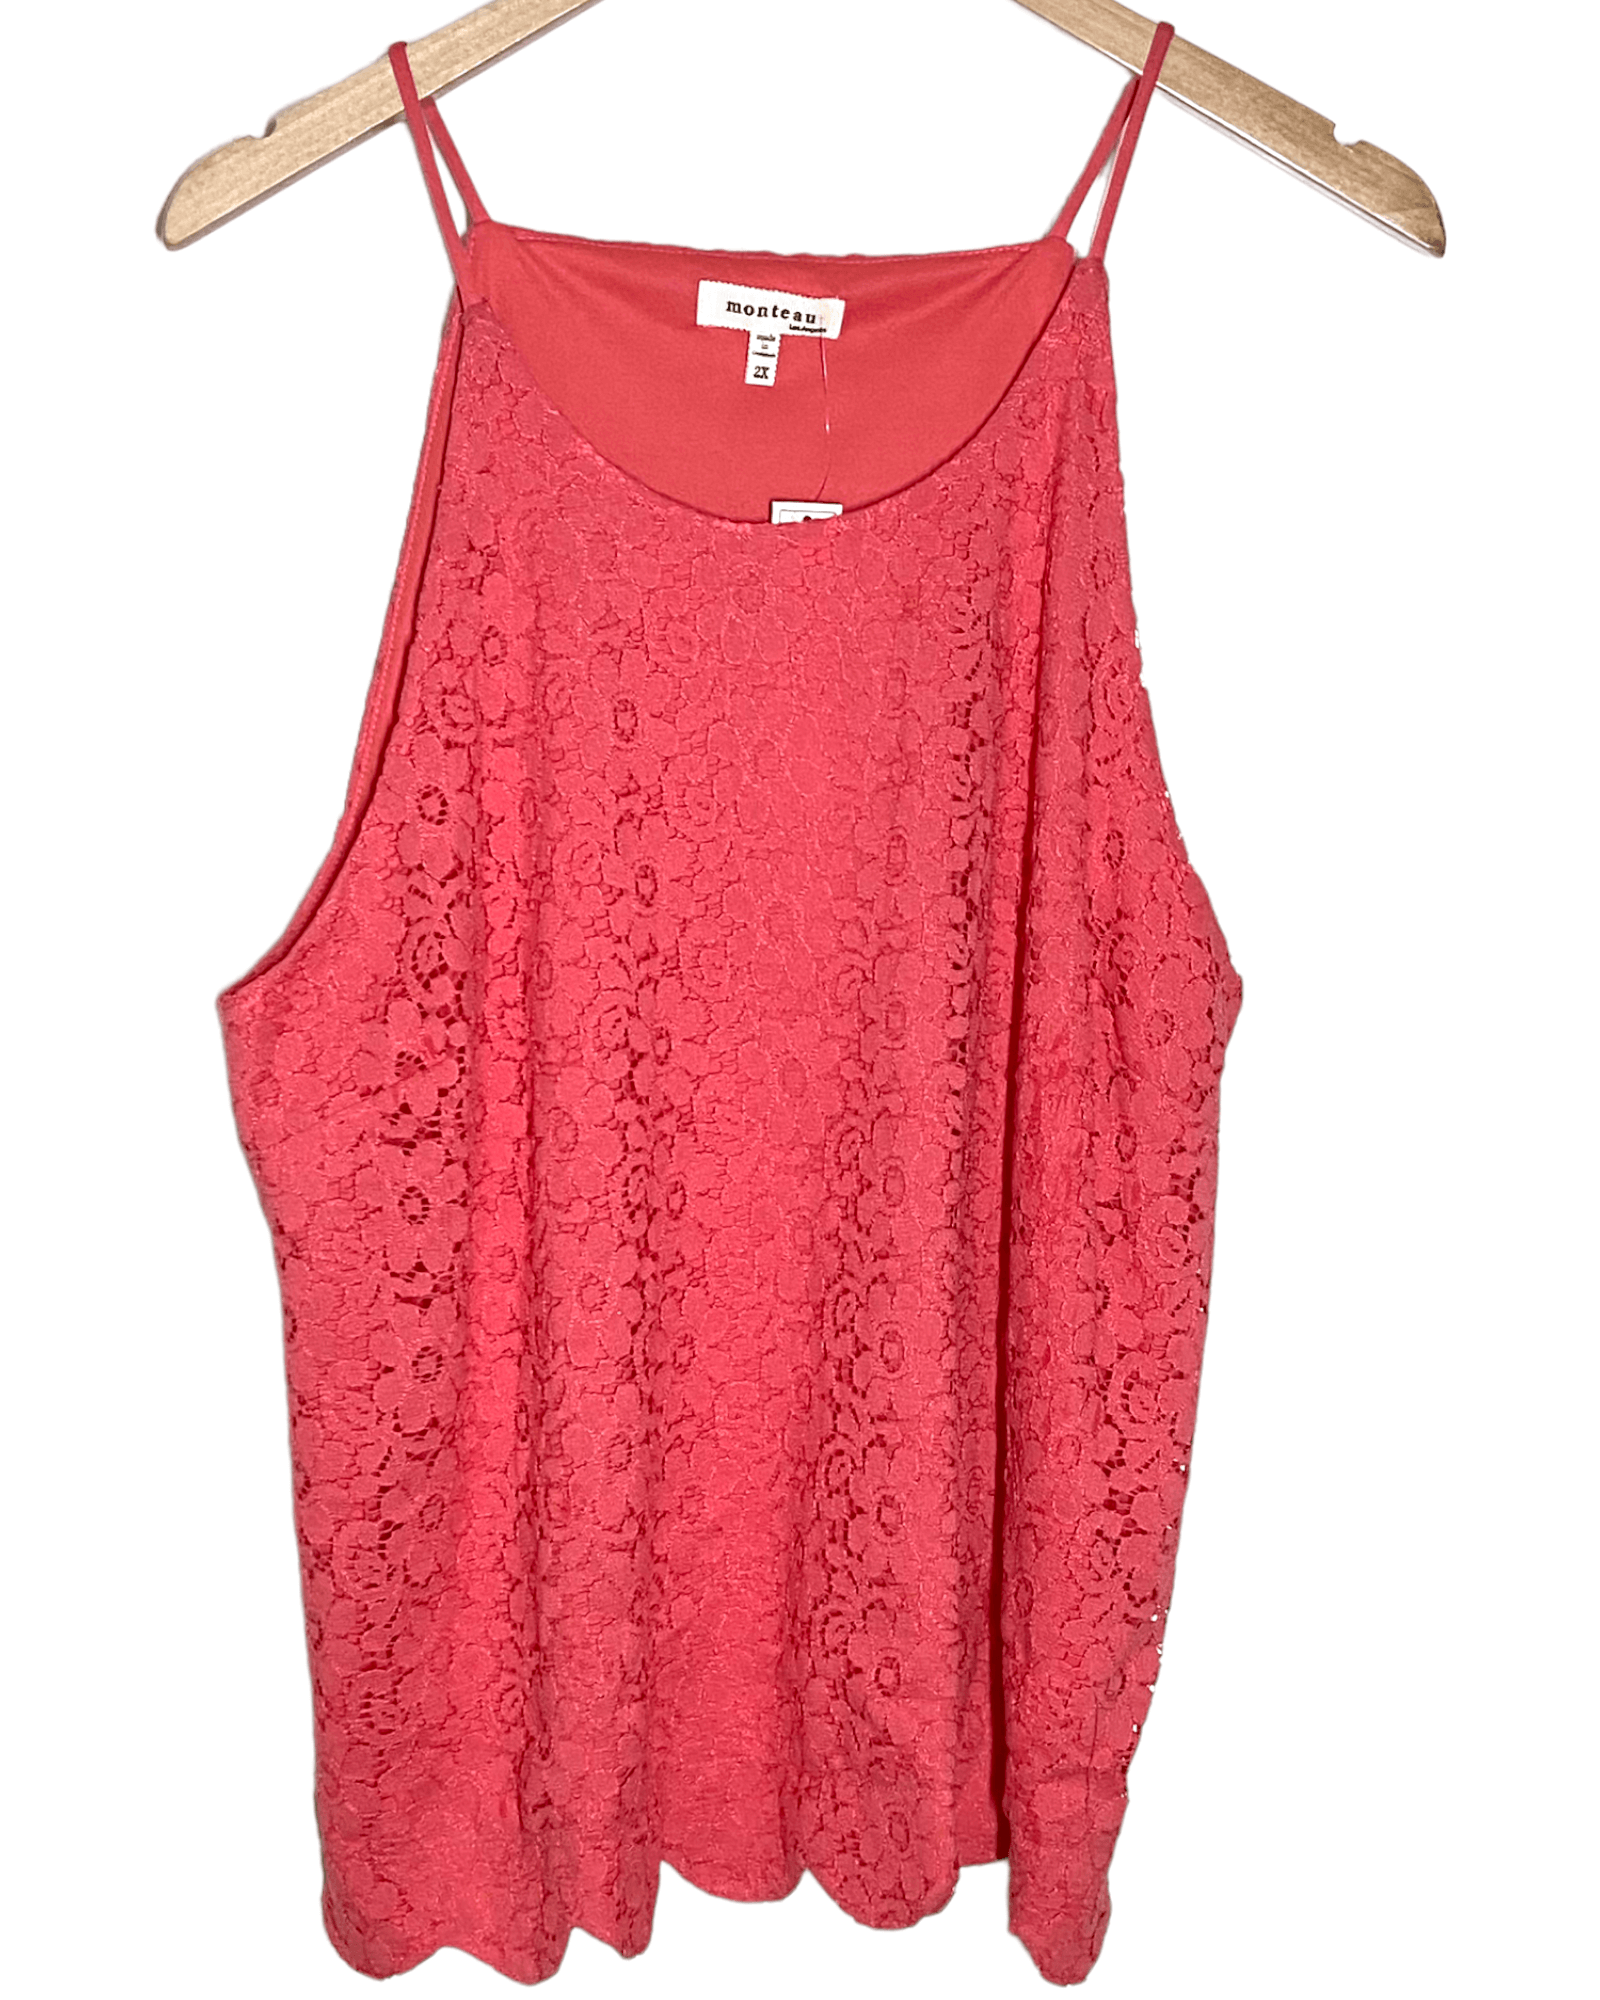 Light Spring MONTEAU coral sleeveless lace top